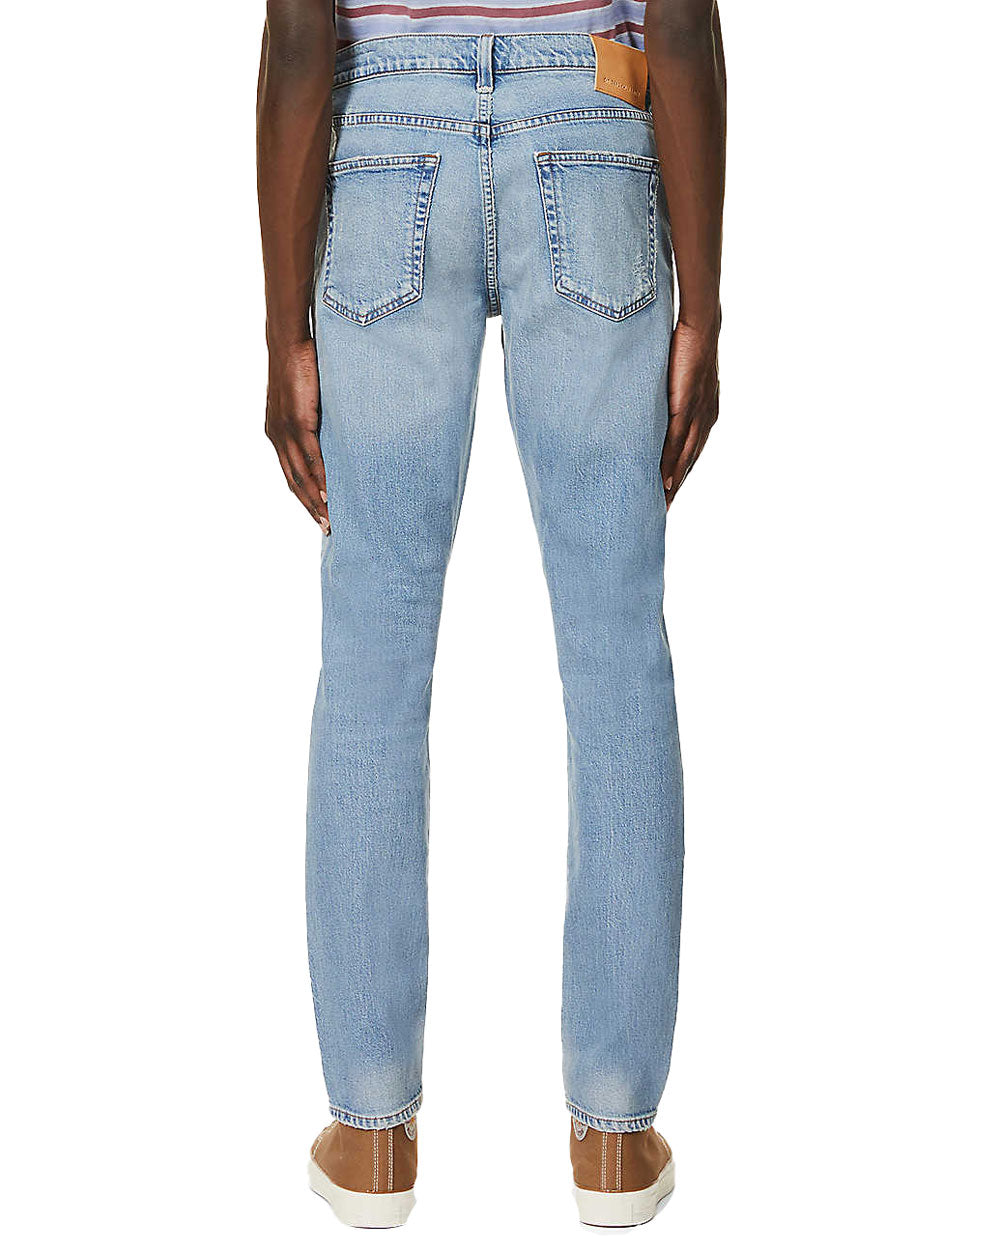 The London Tapered Slim Fit Jean in Shasta